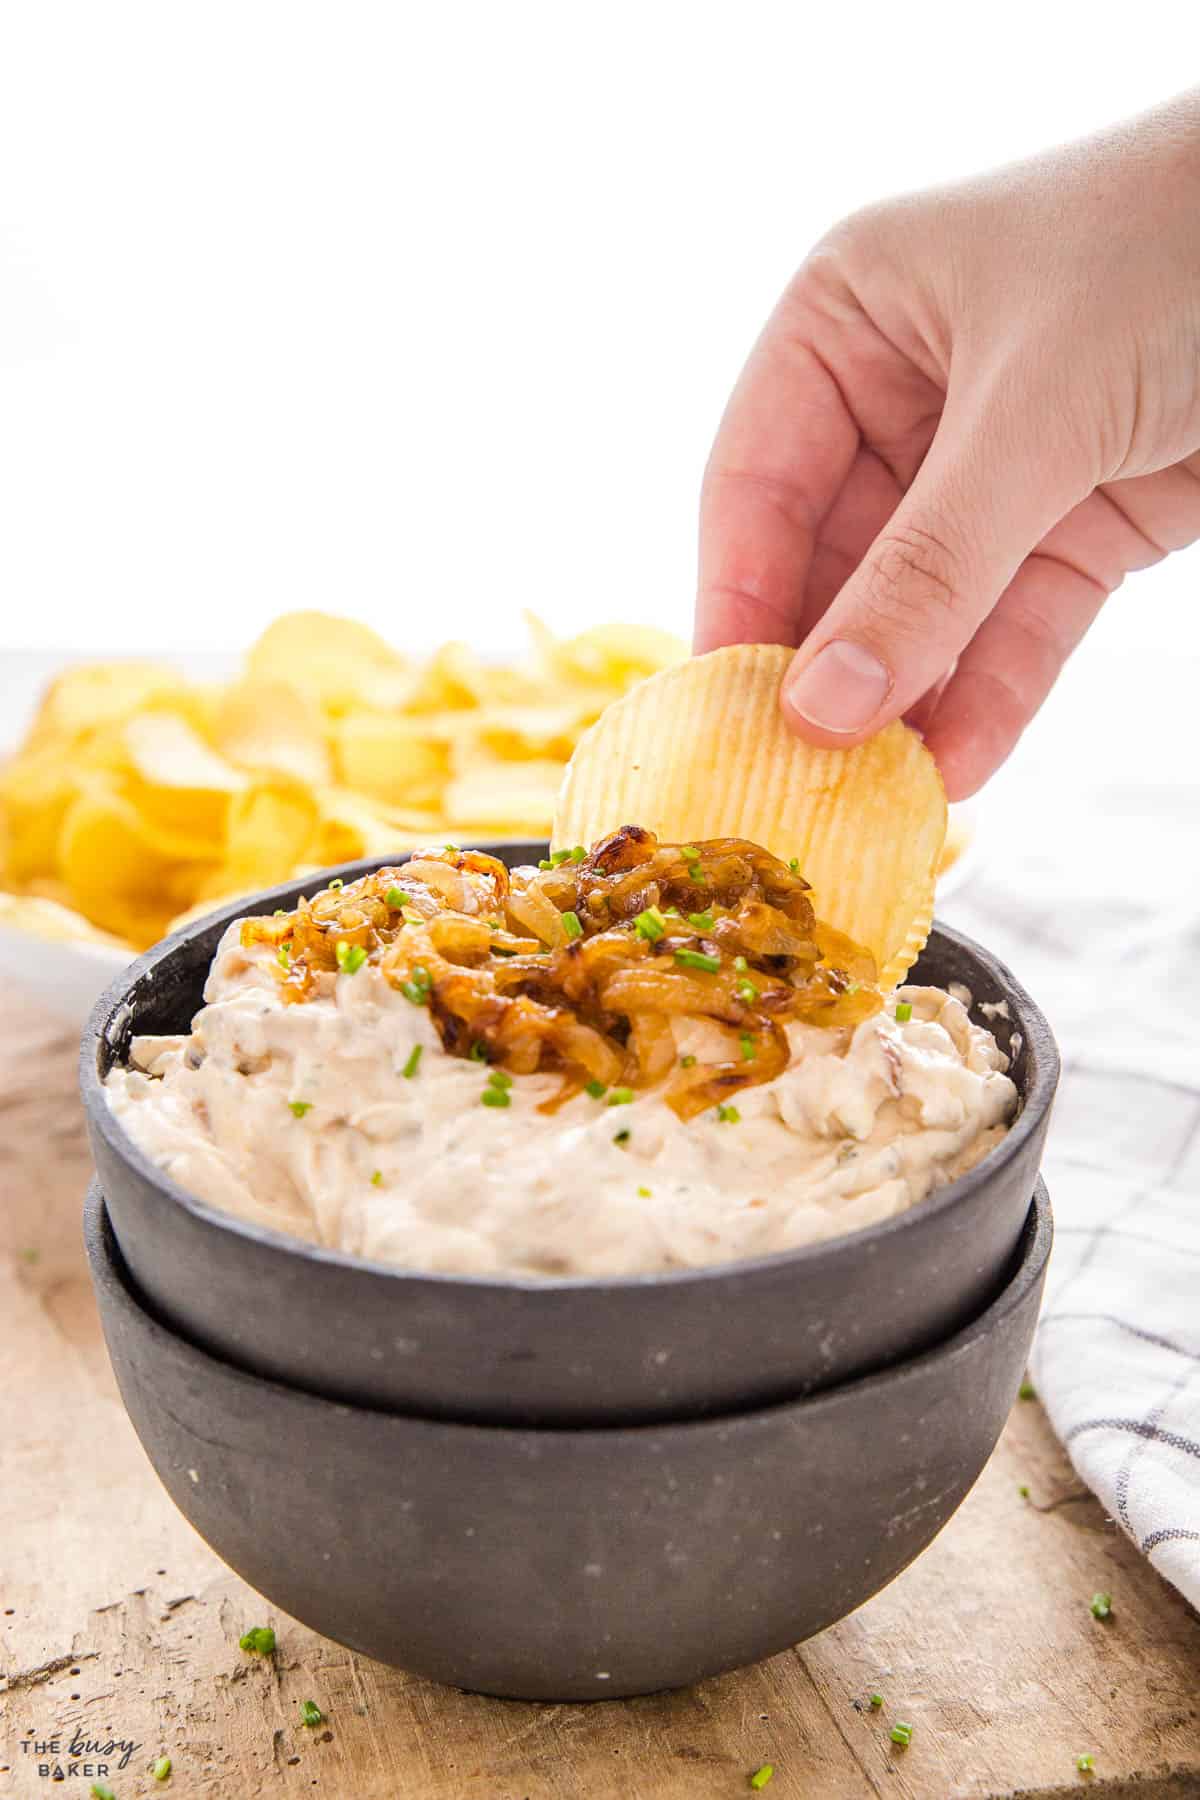 hand dipping a chip into chip dip